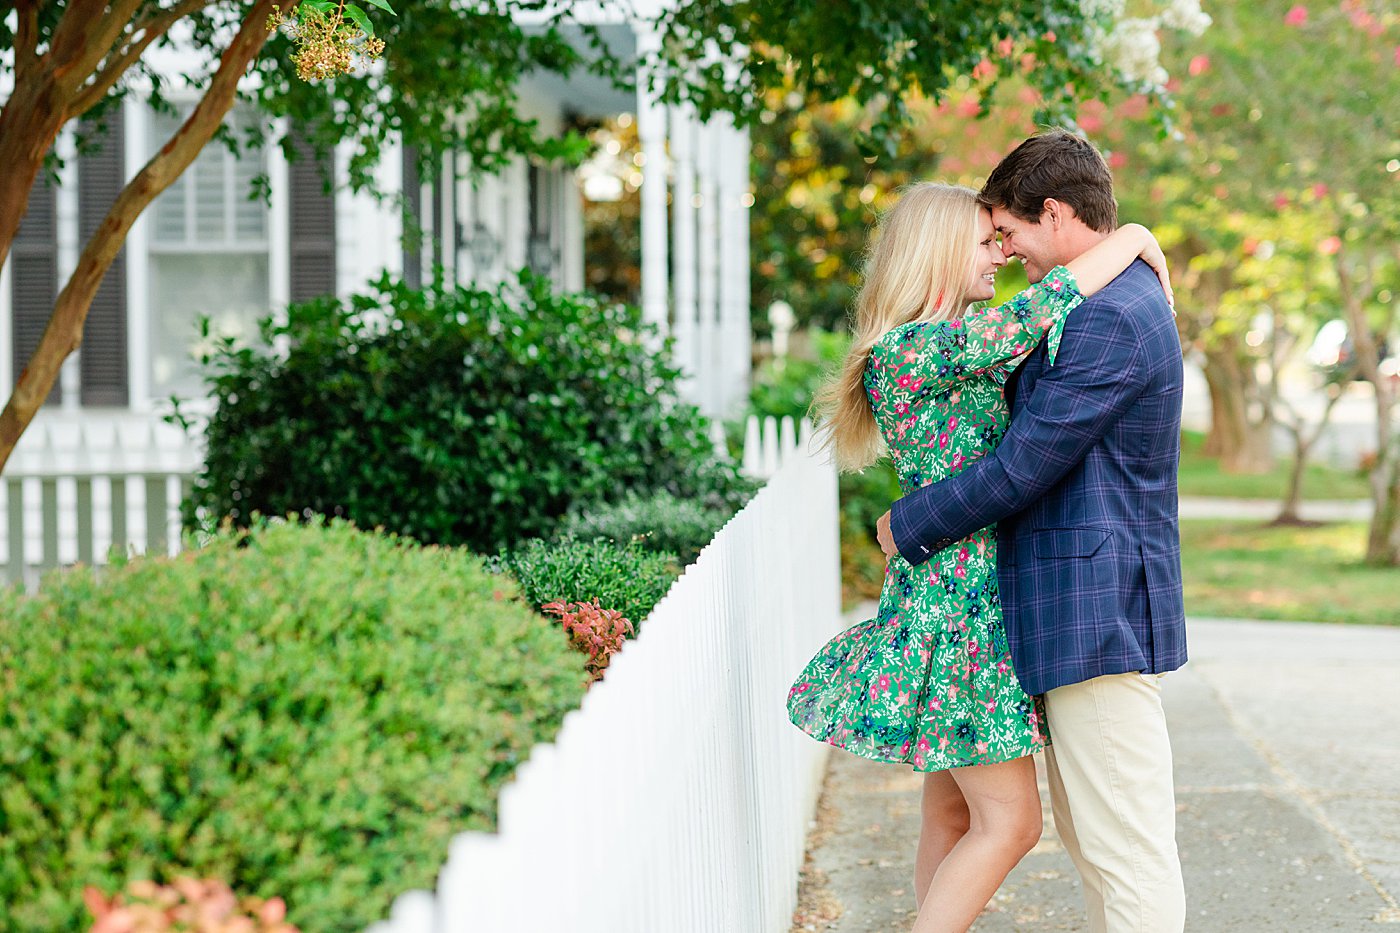 Windy Beaufort NC Engagement Session